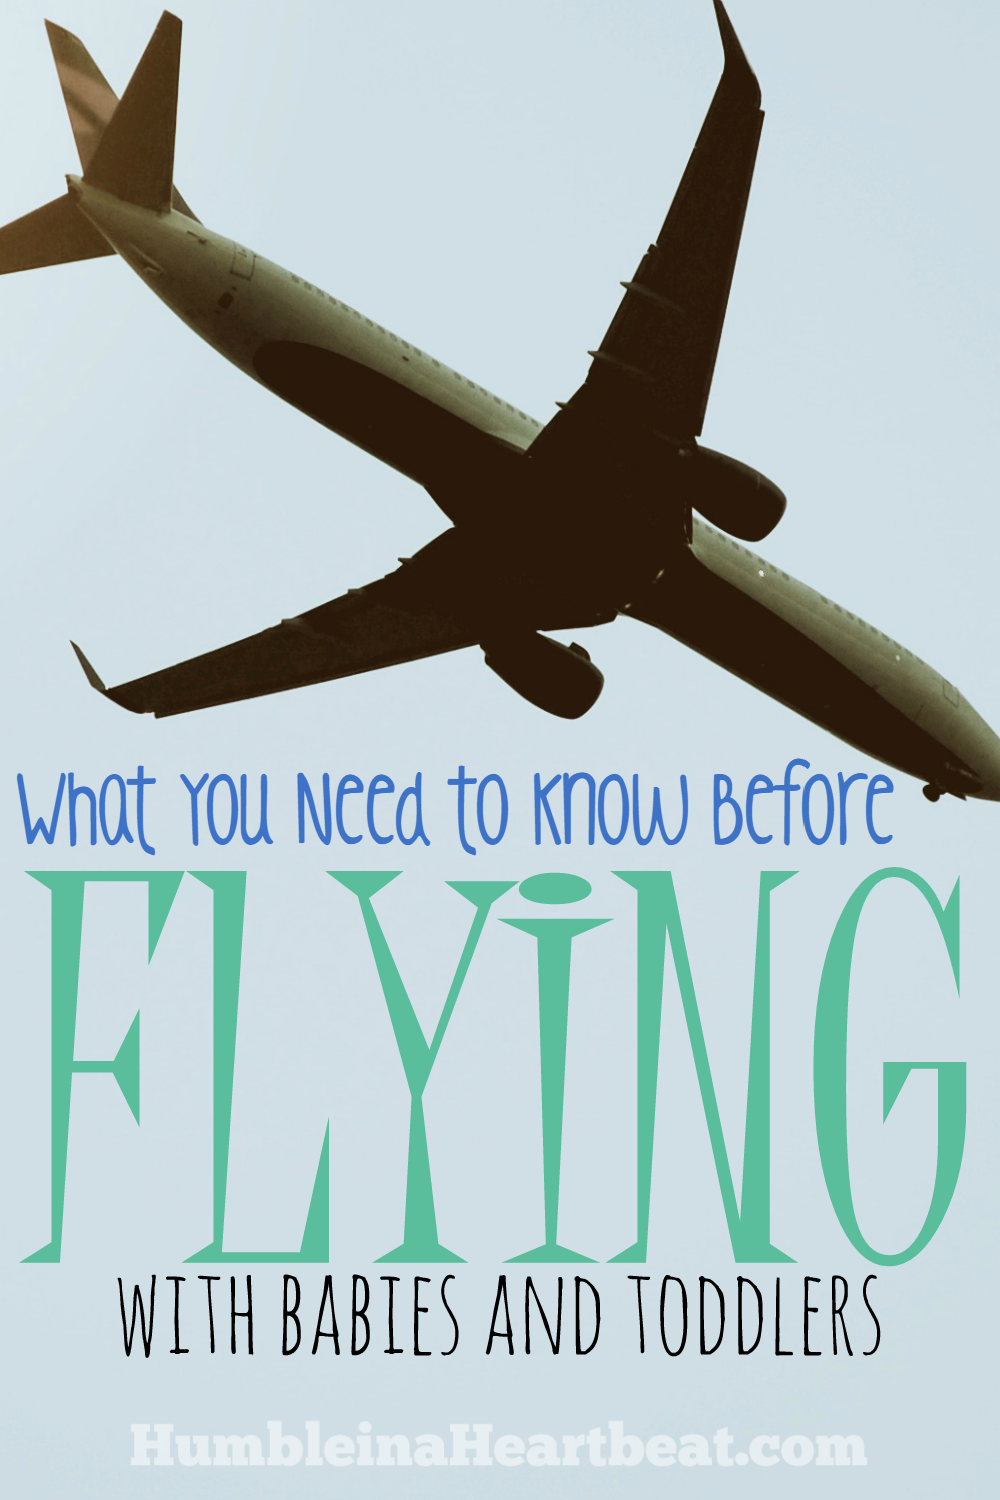 One flight with young children can send you over the edge...UNLESS you have some tricks up your sleeve. Here are several tips for making sure your flight goes smooth and you don't get death stares!